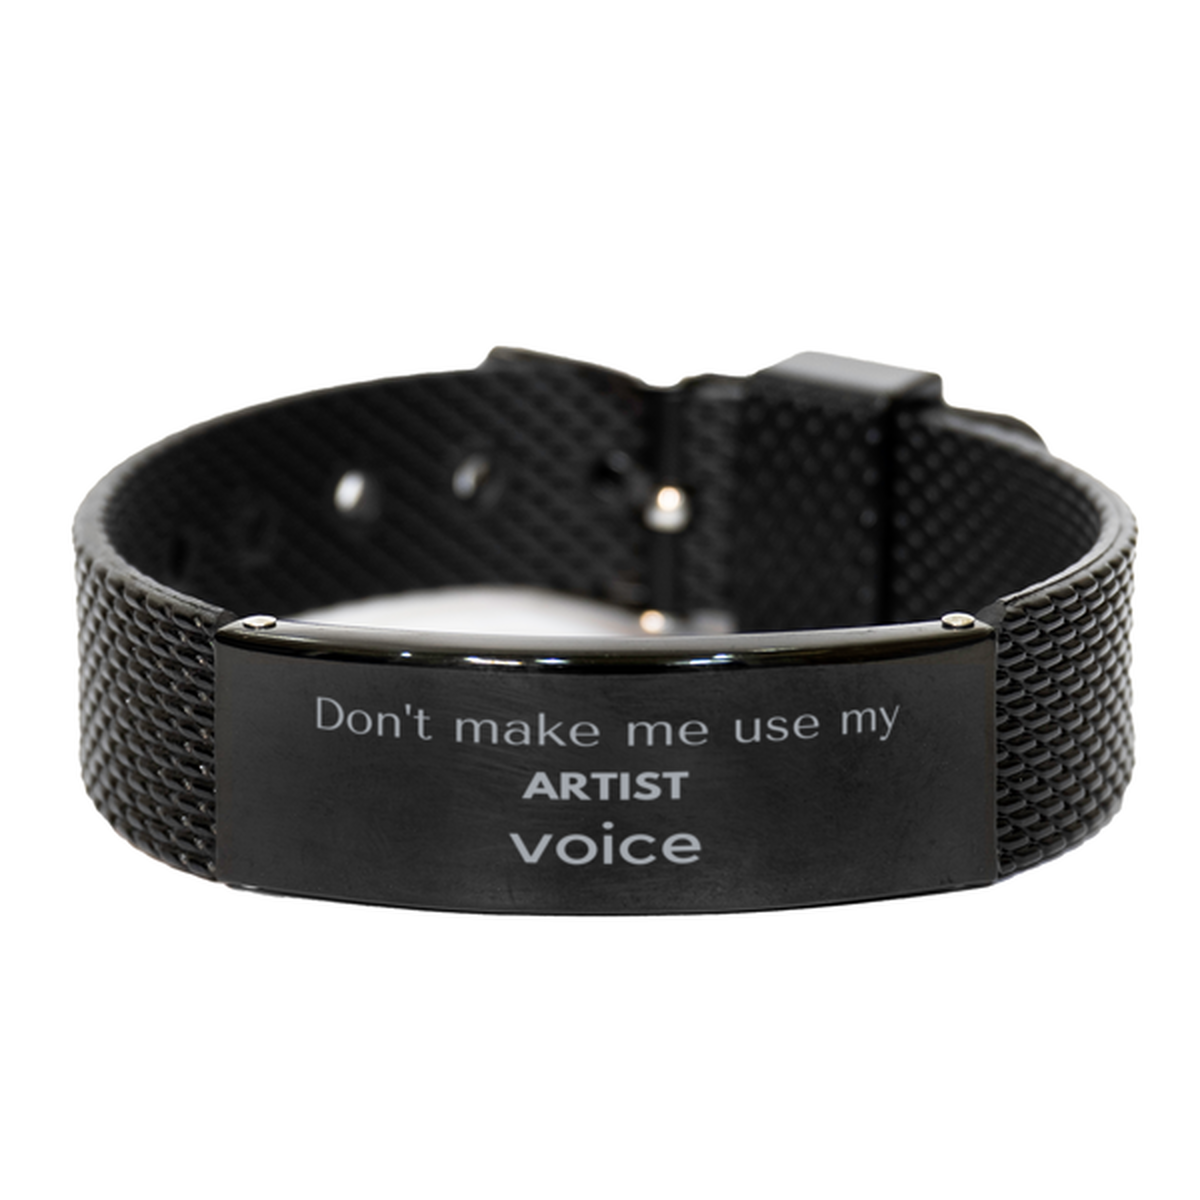 Don't make me use my Artist voice, Sarcasm Artist Gifts, Christmas Artist Black Shark Mesh Bracelet Birthday Unique Gifts For Artist Coworkers, Men, Women, Colleague, Friends